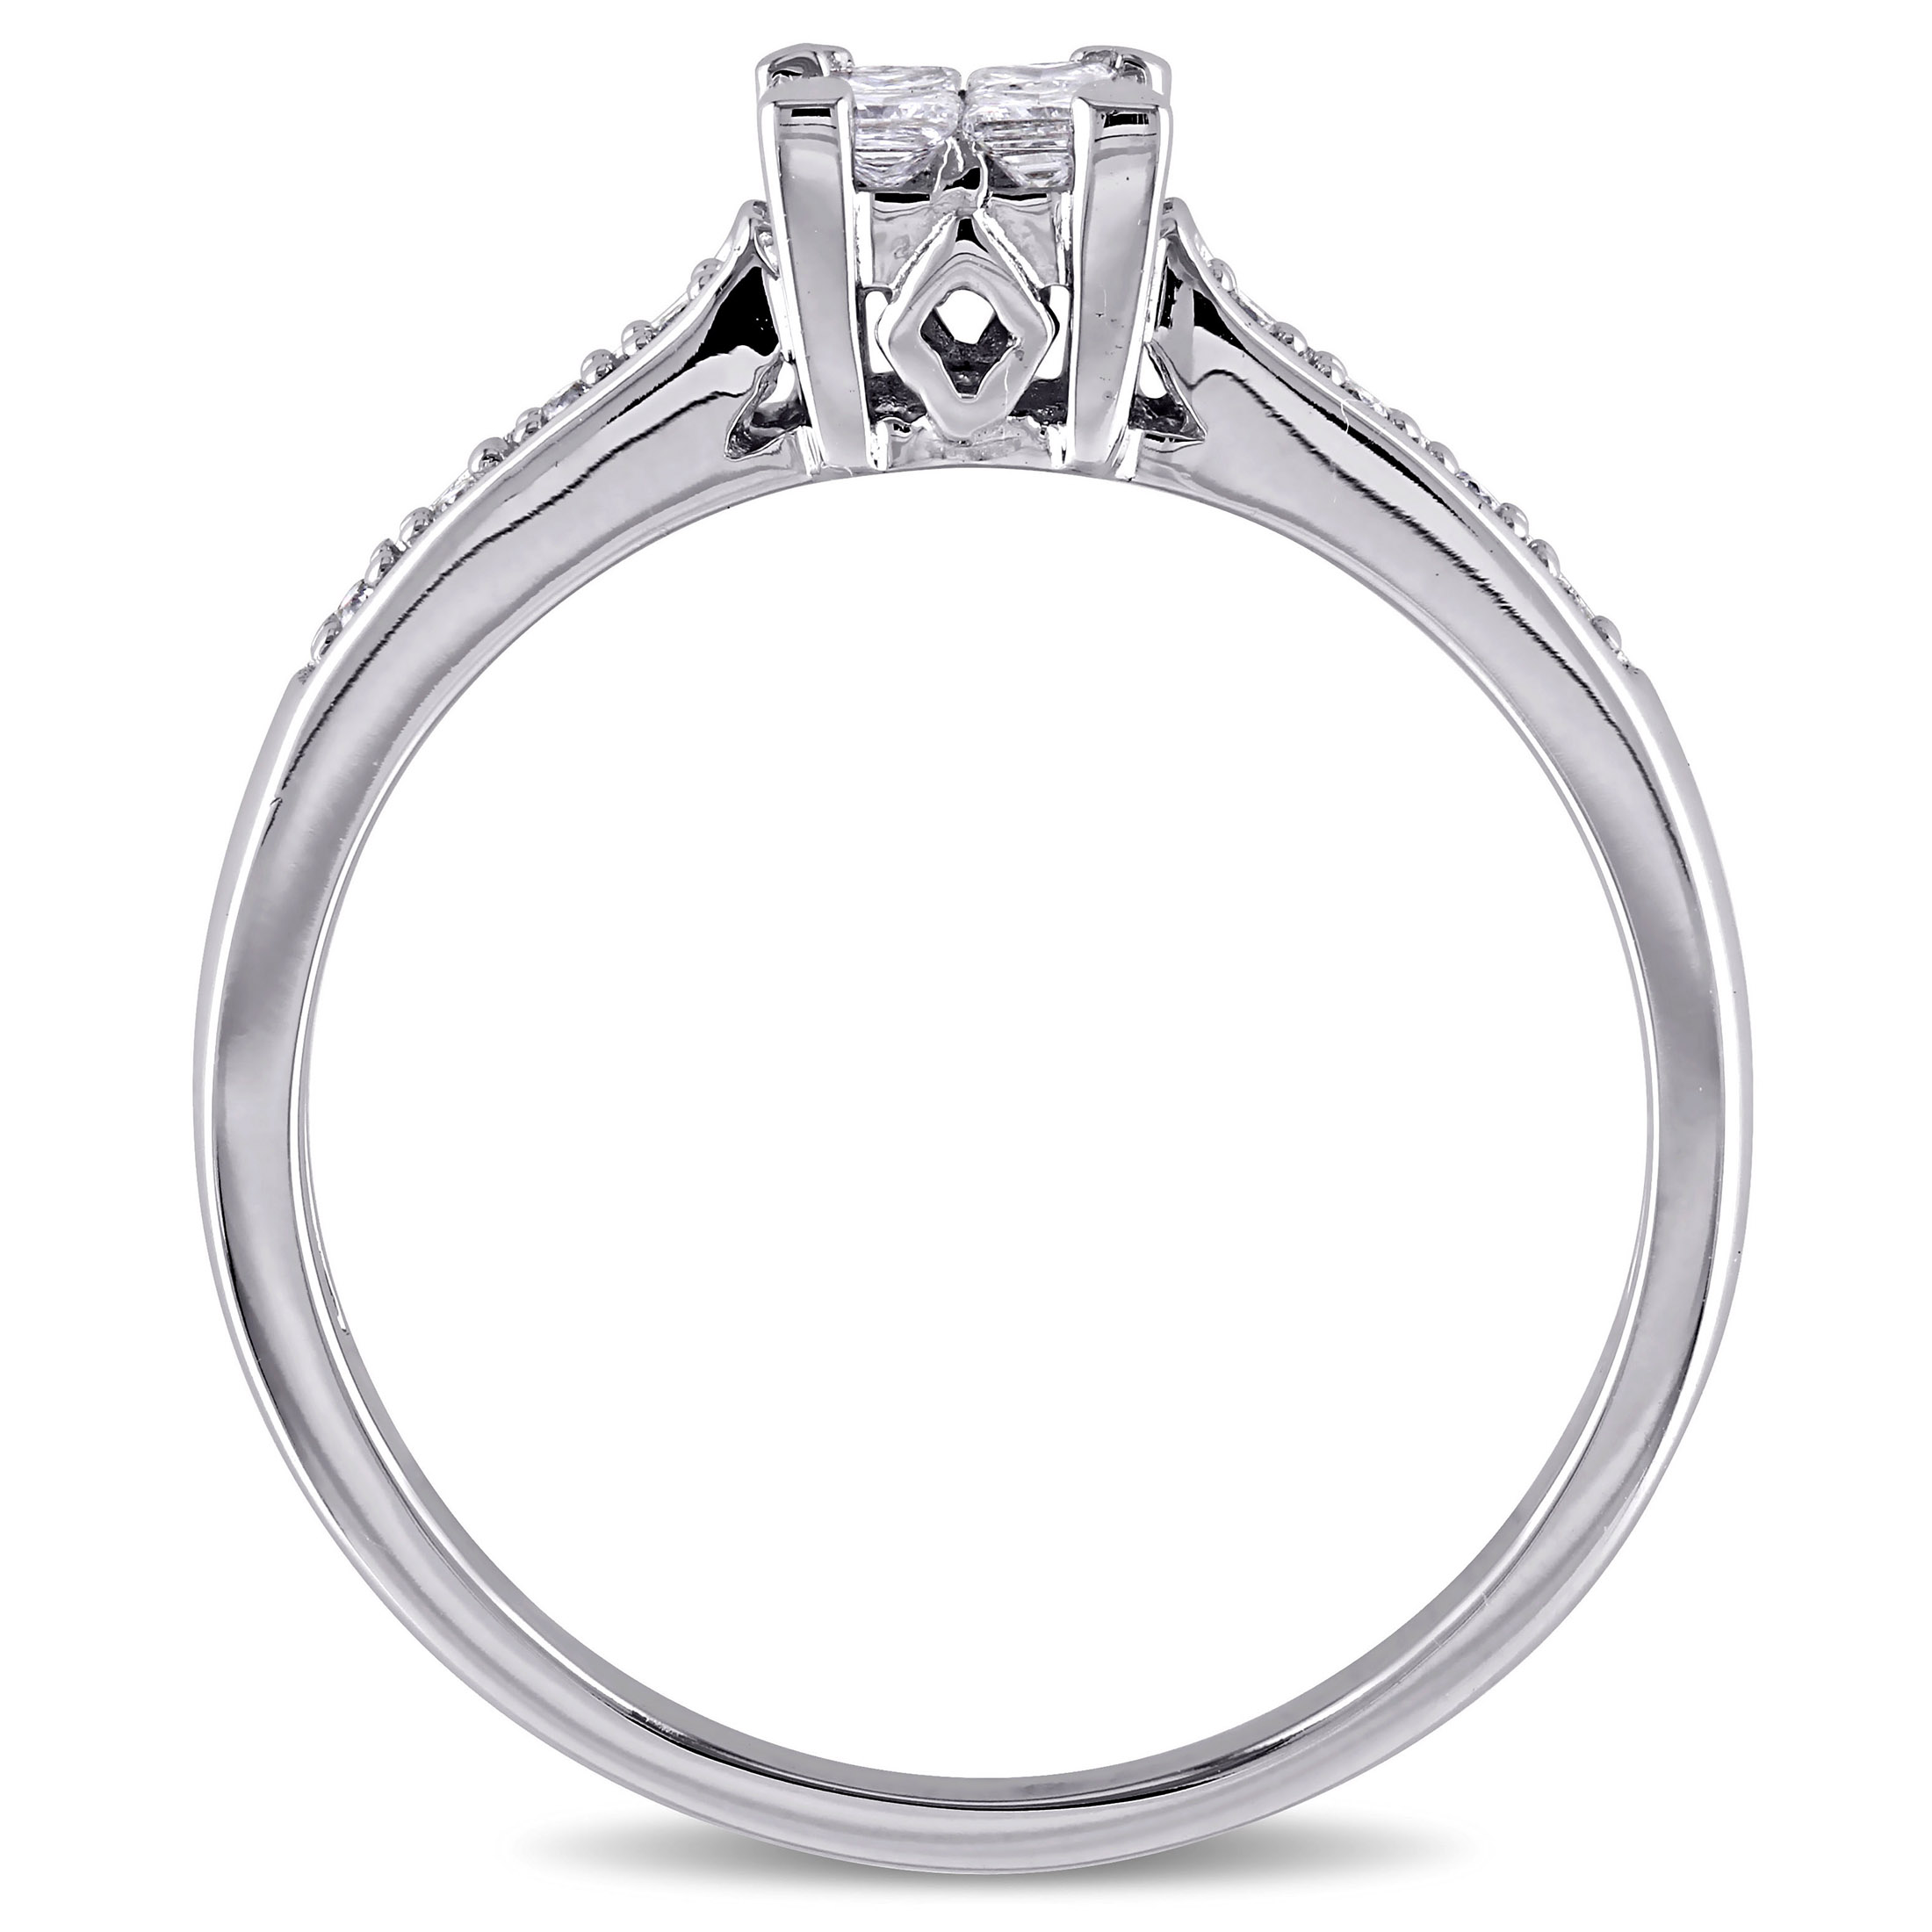 Everly Women's 1/4 Carat TDW Princess and Round-Cut Diamond 10kt White Gold Solitaire Style Bridal Engagement Ring with Invisible Quad Setting and Pave setting on Band (G-H, I2-I3) - image 5 of 9